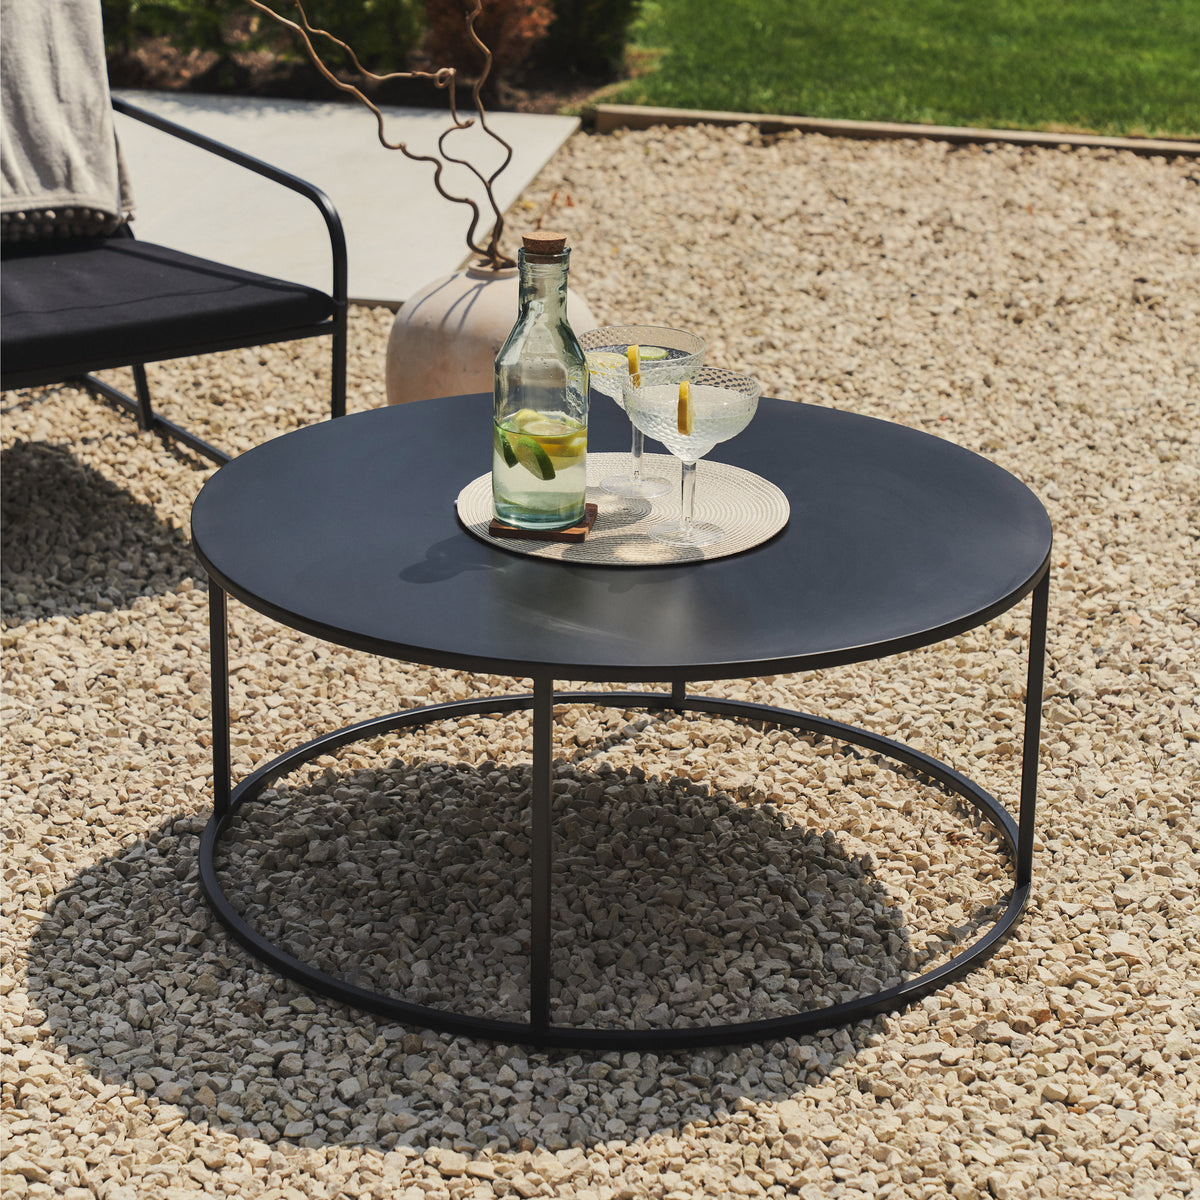 Black Modern Rounded Garden Coffee Table with citrus drink